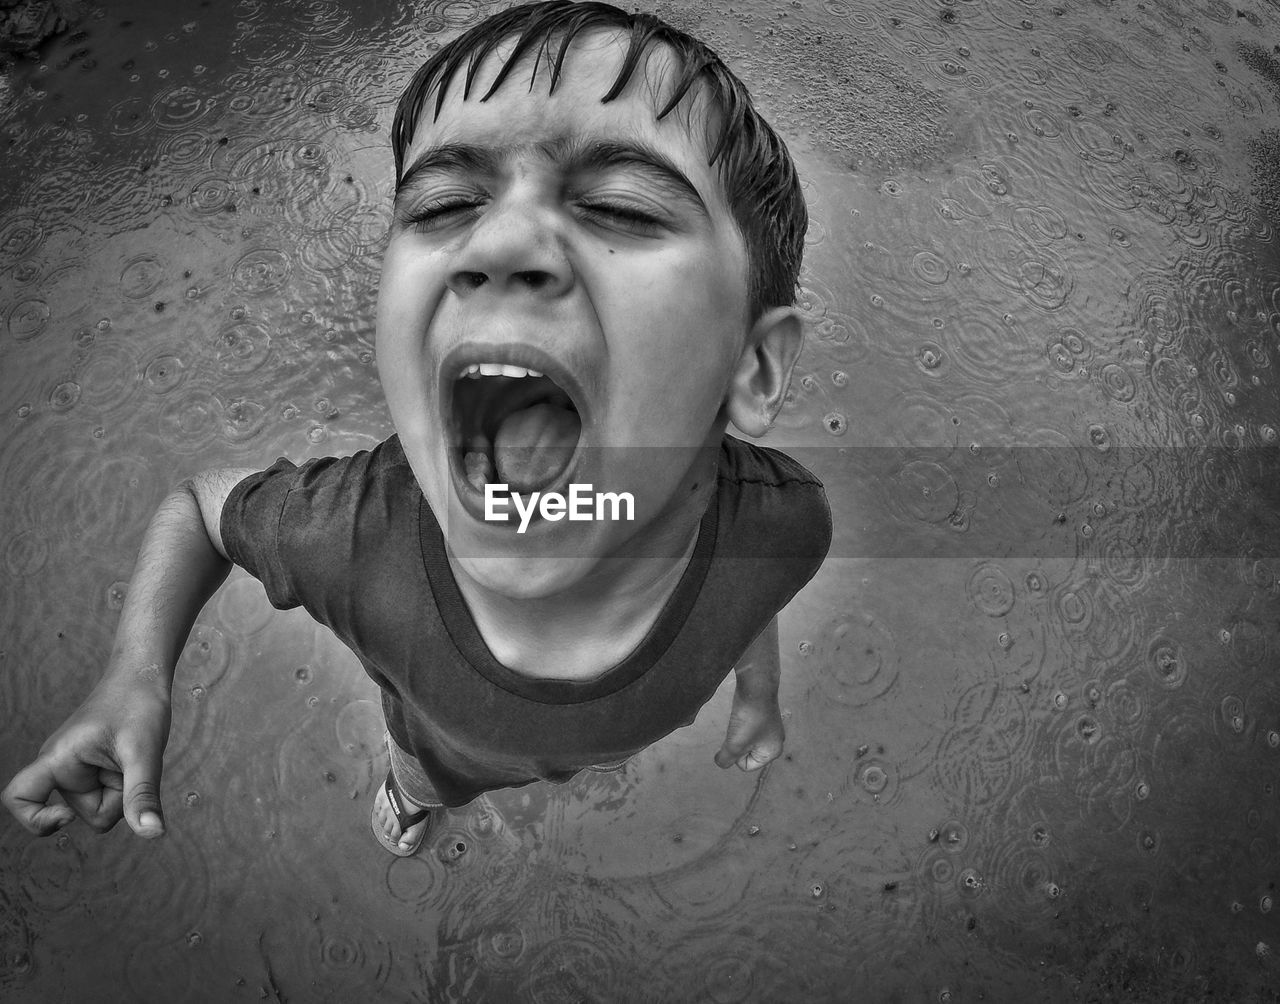 Overhead view of a child with mouth open in the rain